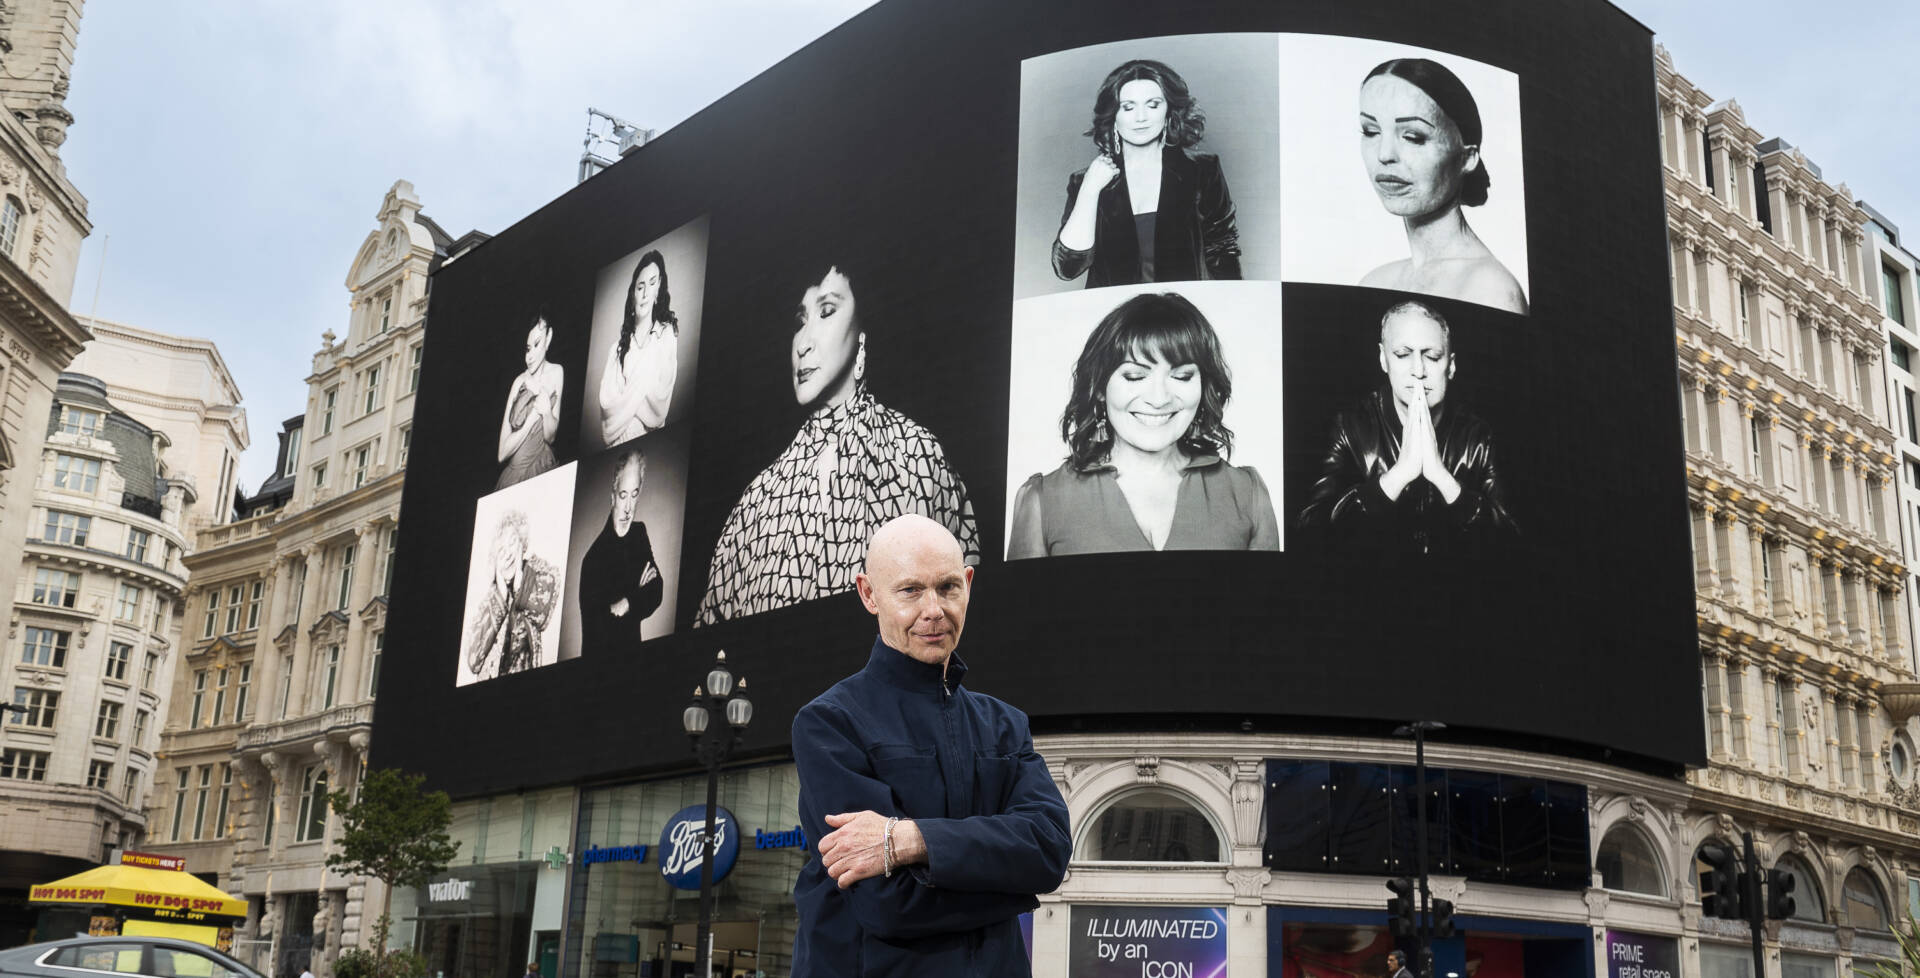 Take a Moment returns to Piccadilly Lights - Heart of London